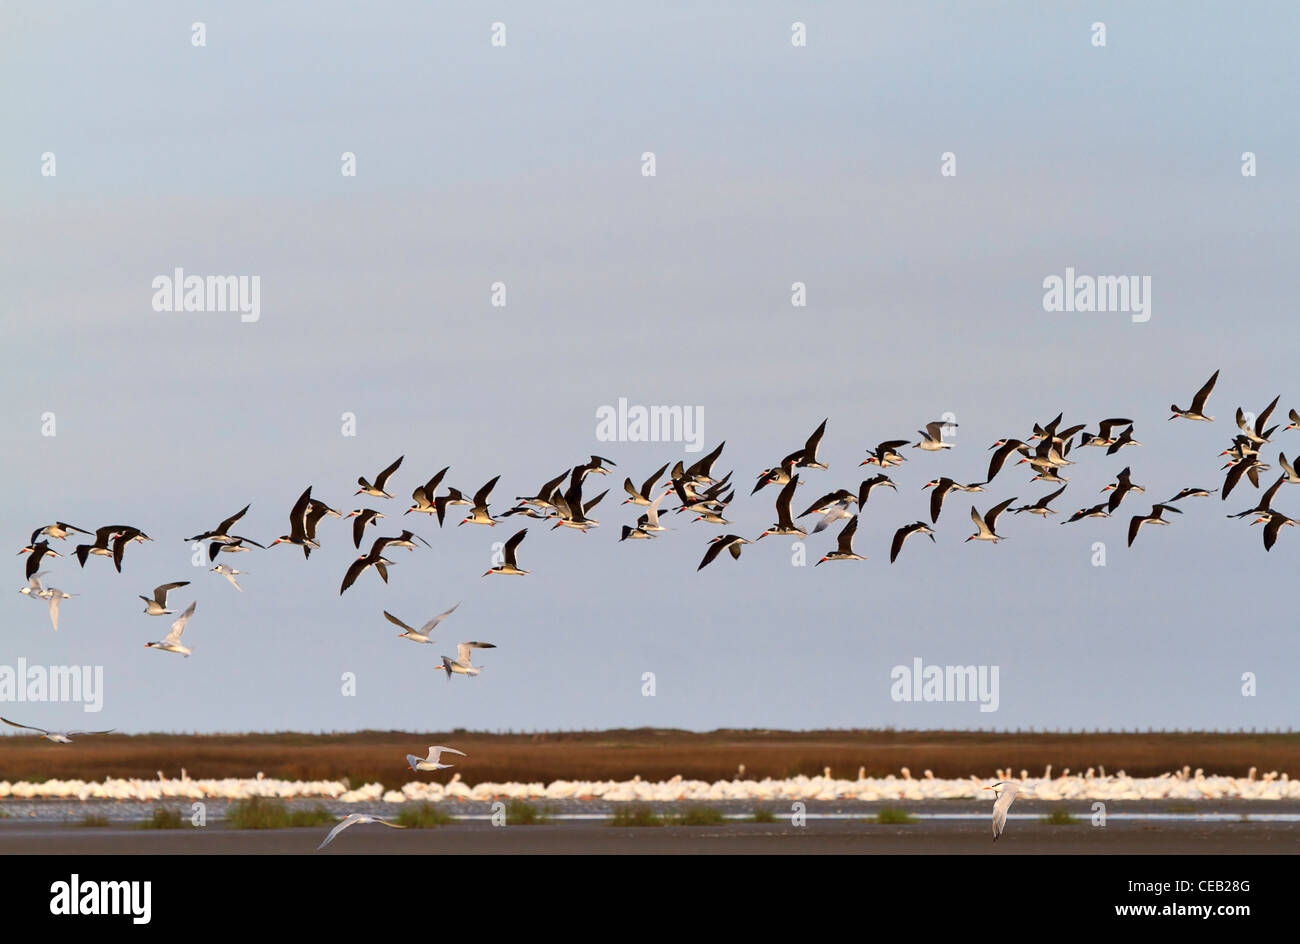 A flock of Black Skimmers, Rynchops niger wheels above the shallow water of the bay beside Bolivar Jetty, Texas. Stock Photo